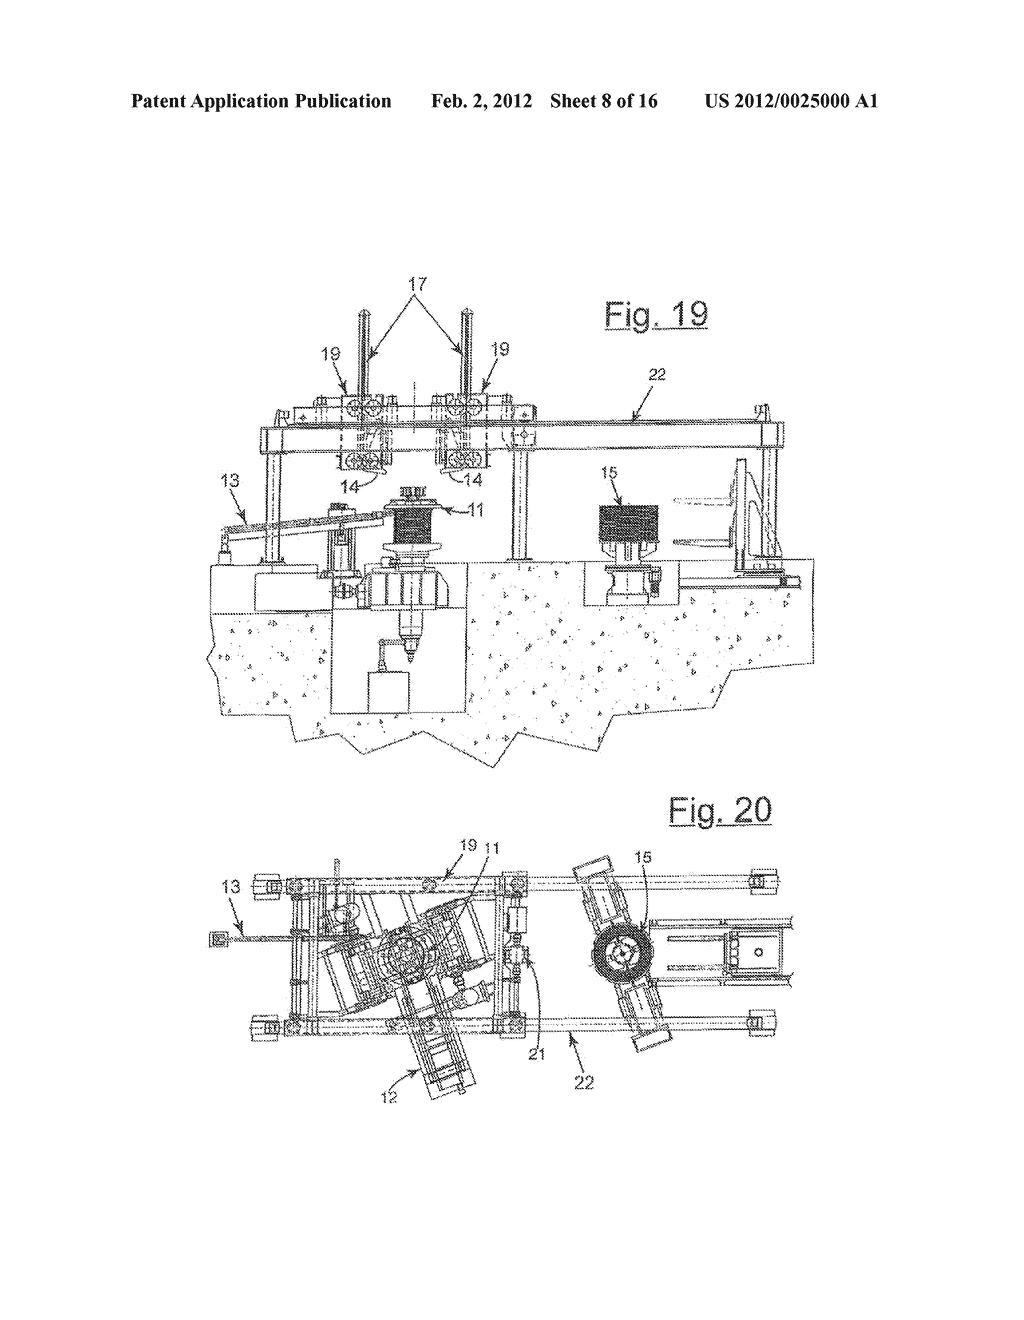 MACHINE FOR WINDING A WIRE FROM A ROLLING MILL INTO A COIL WITH IMPROVED     MEANS FOR LOCKING THE WIRE TAIL END AND CONTAINING THE COIL FORMED - diagram, schematic, and image 09